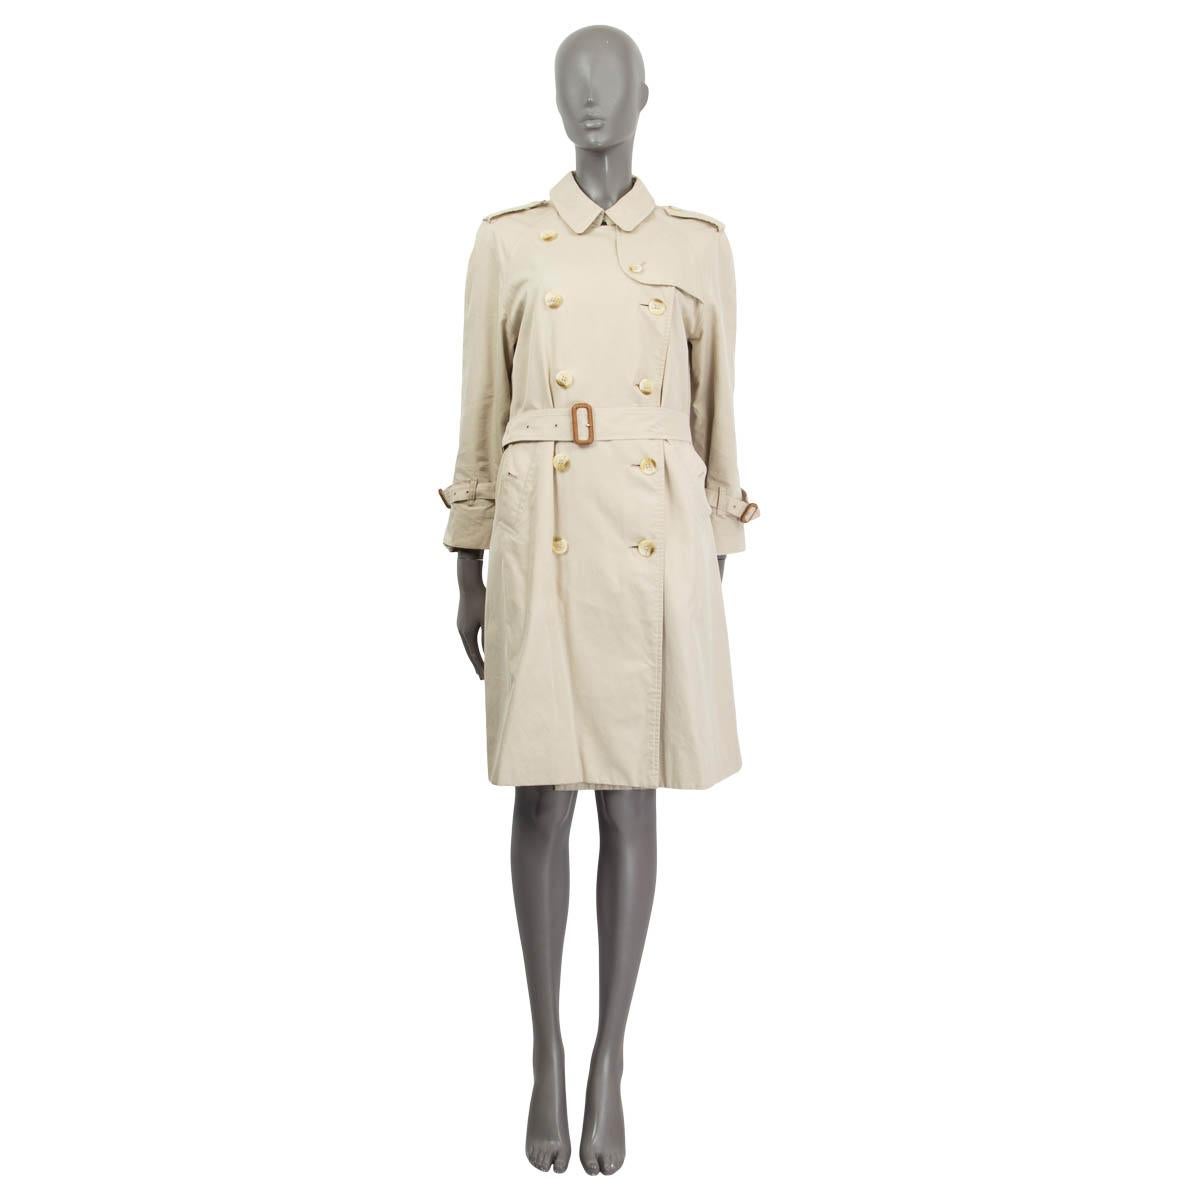 100% authentic Burberry belted double breasted trench coat in beige cotton (100%) with shoulders and cuffs epaulettes and detachable belt. Closes with one hook and one button at the neck and four buttons on the front, with two buttoned flap pockets